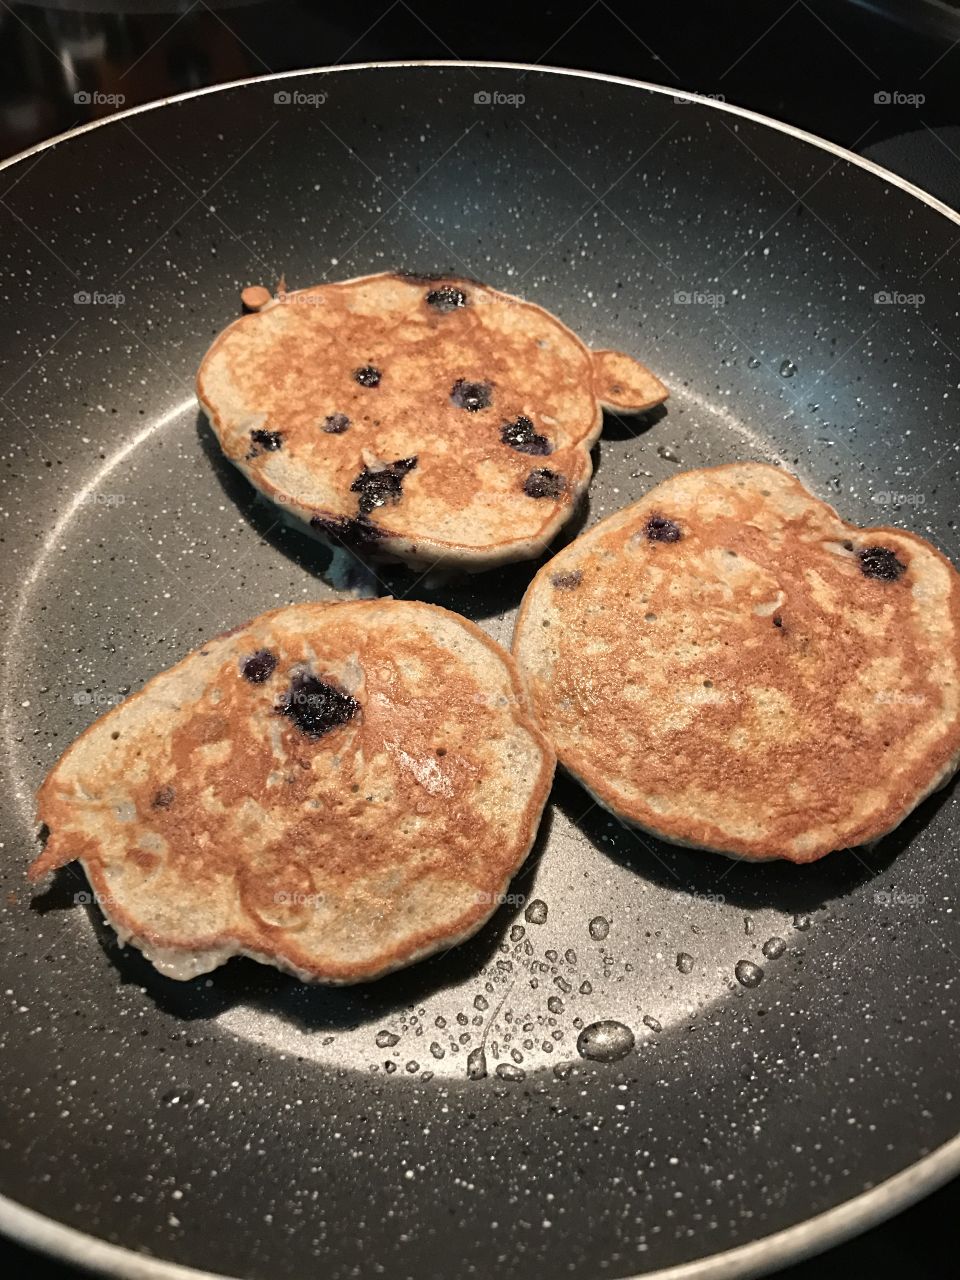 Making some blueberry pancakes today for breakfast 🍳 